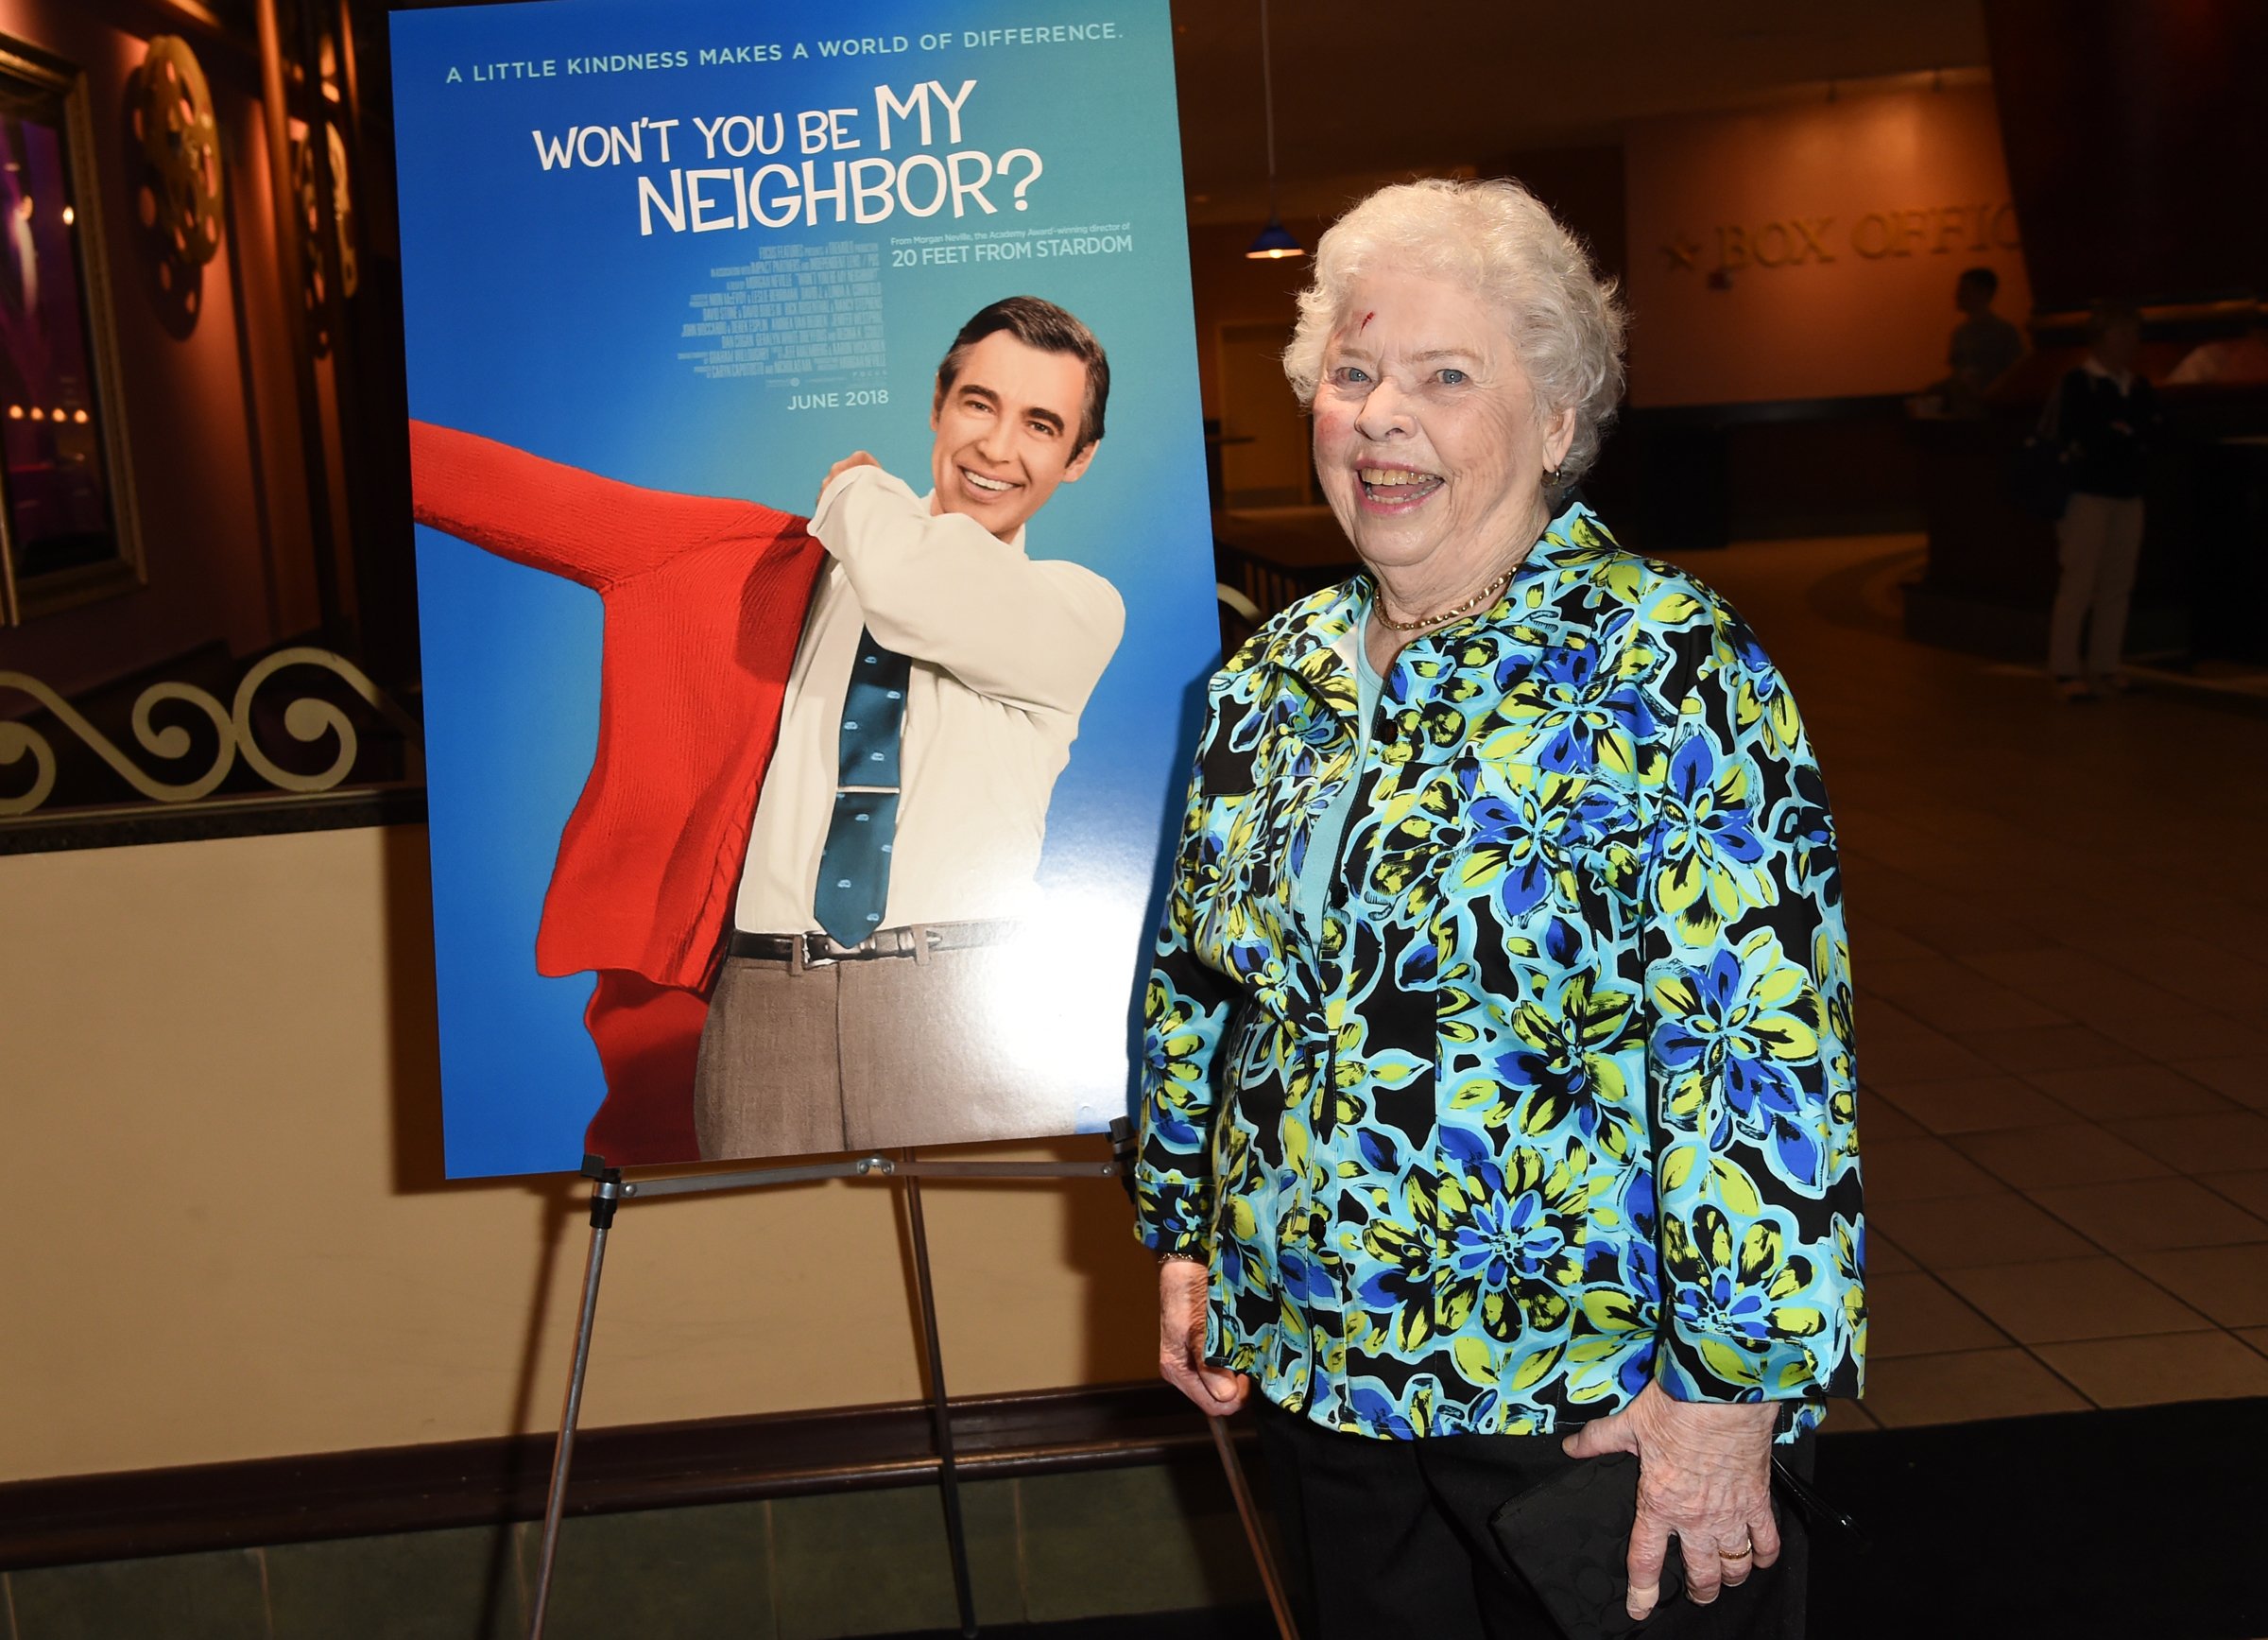 Joanne Rogers at a special screening of "Won't You Be My Neighbor?" on May 23, 2018, in West Homestead, Pennsylvania. | Source: Jason Merritt/Getty Images